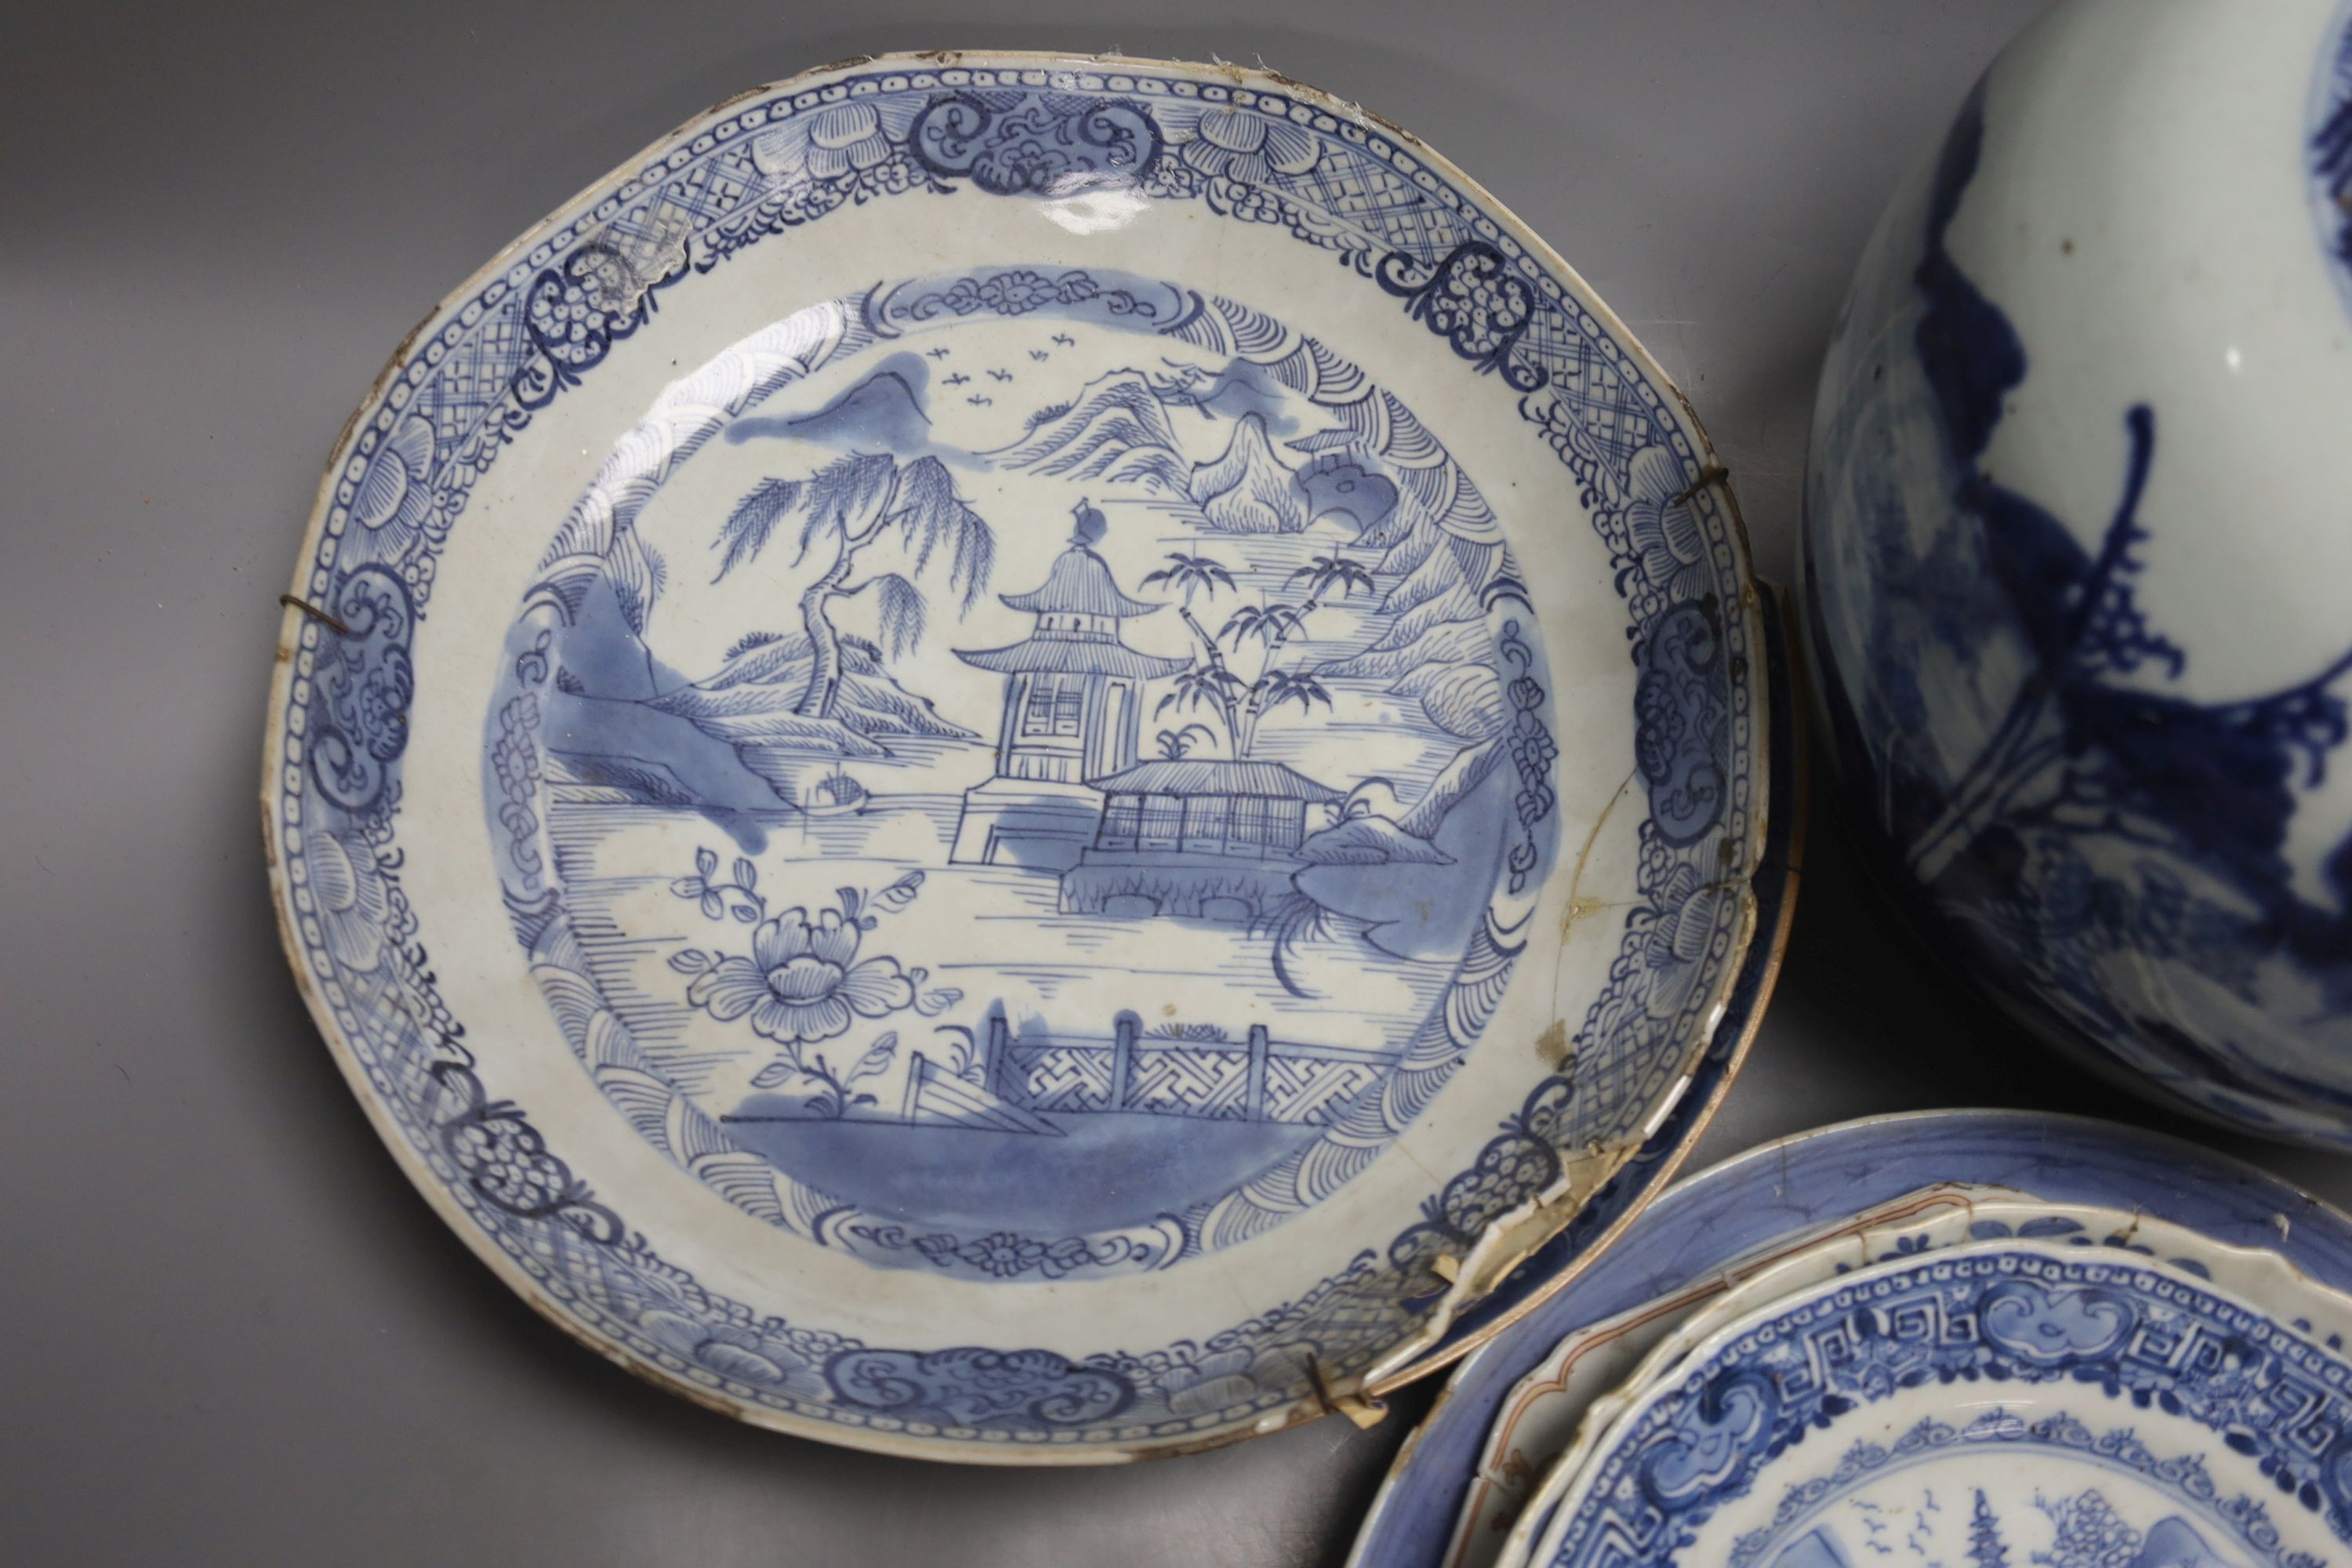 A group of 18th century Chinese export blue and white dishes, plates and a jar, the jar 21.5cm high